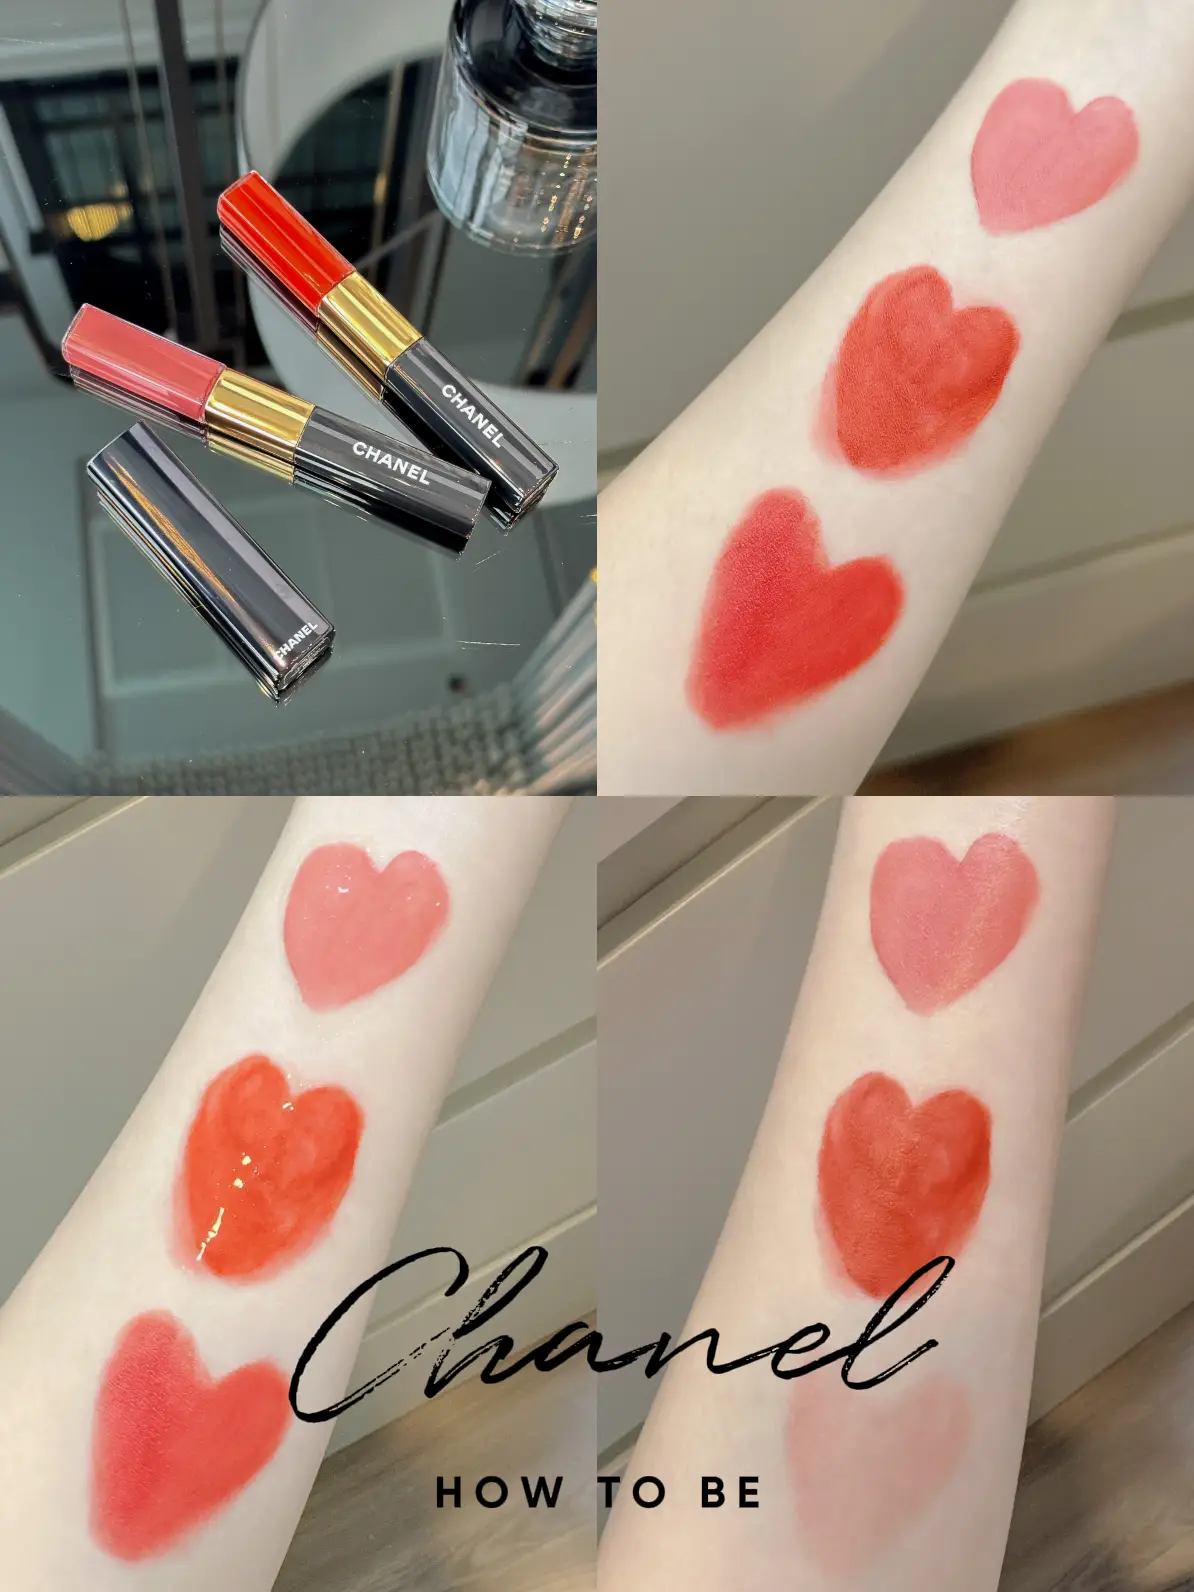 Chanel Blushes New and Old Formula Comparisons